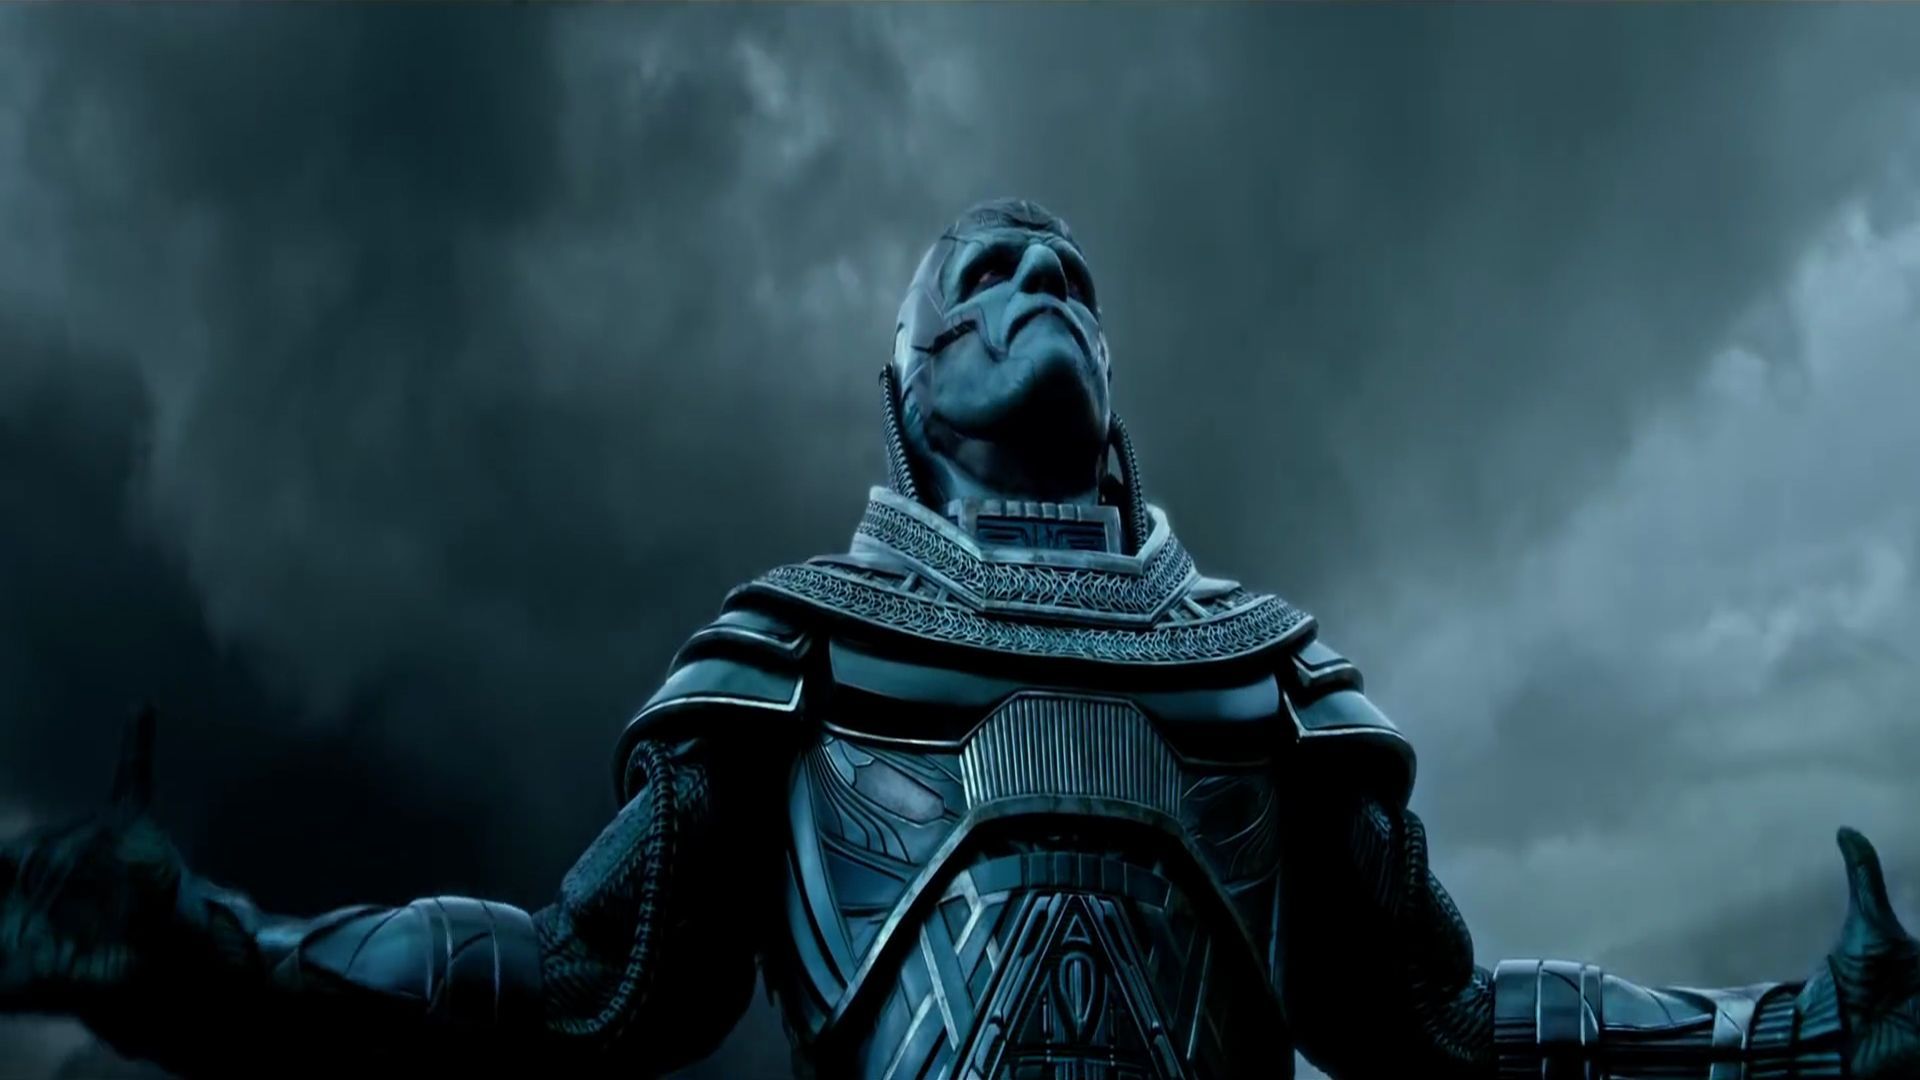 HD Wallpapers of X Men Apocalypse Hollywood Film | Image Download